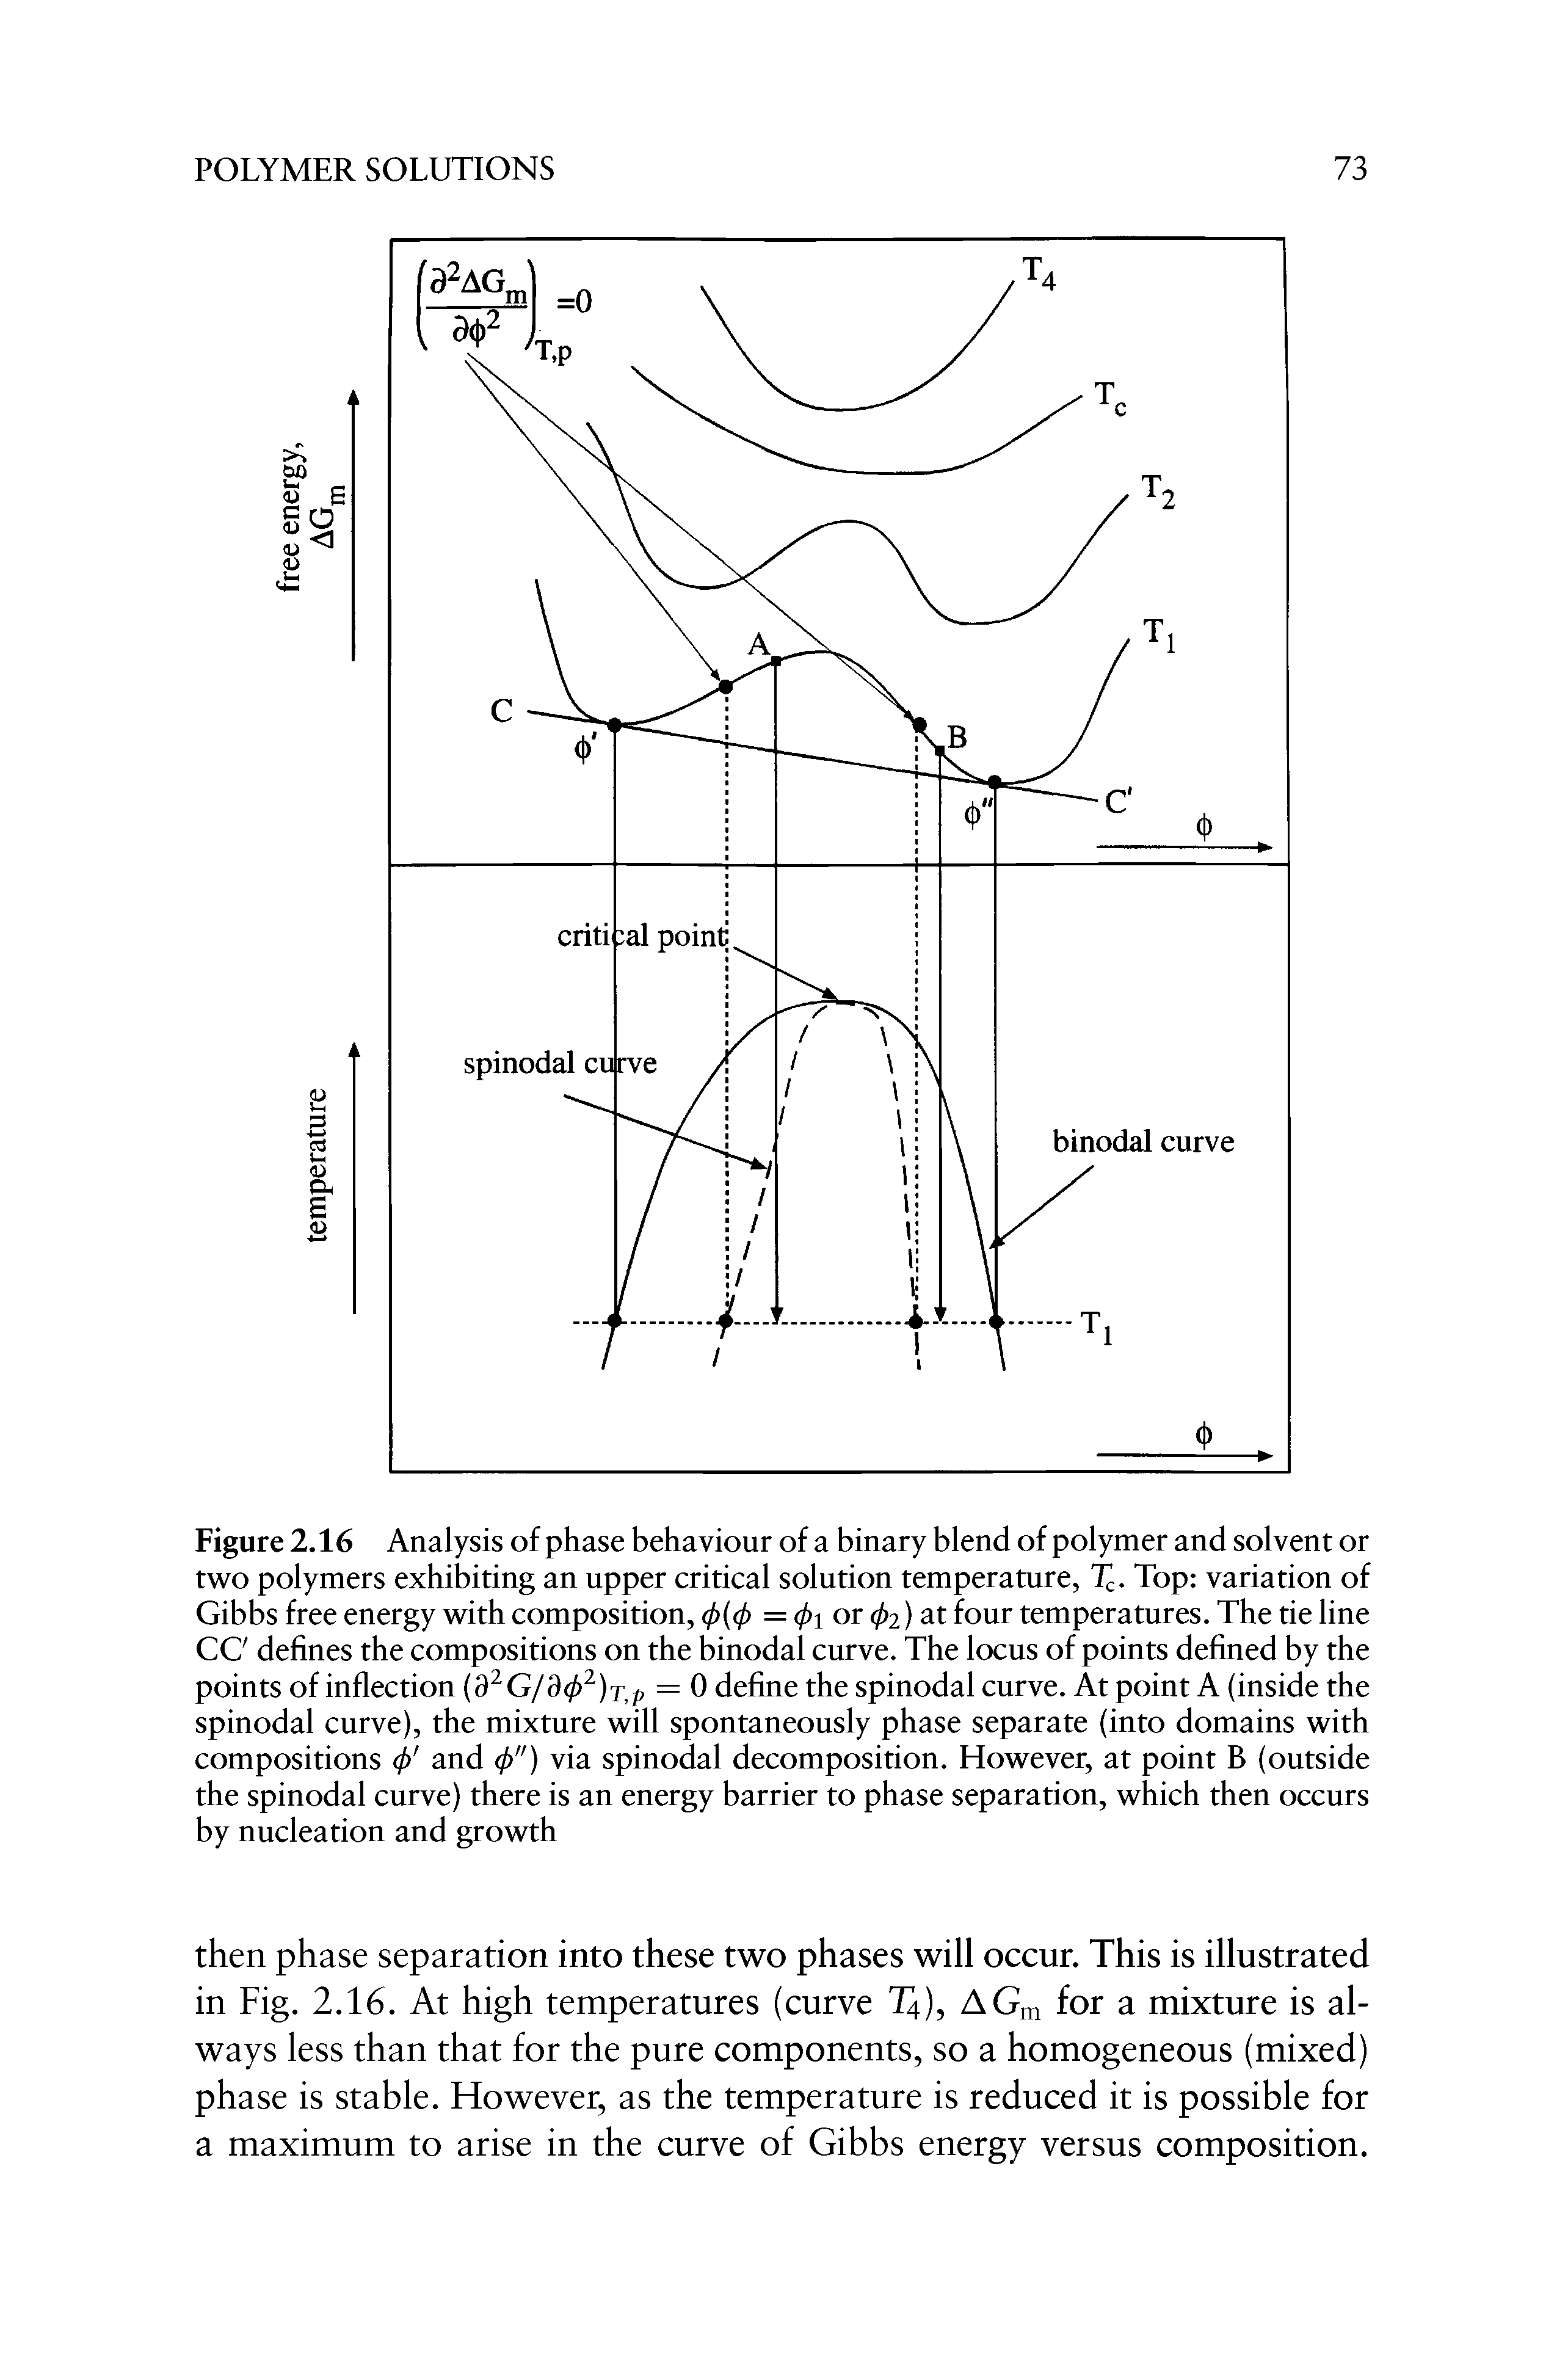 Figure 2.16 Analysis of phase behaviour of a binary blend of polymer and solvent or two polymers exhibiting an upper critical solution temperature, Top variation of Gibbs free energy with composition, 0(0 = 0i or 02) at four temperatures. The tie line CC defines the compositions on the binodal curve. The locus of points defined by the points of inflection (9 G/90 )t,p = 0 define the spinodal curve. At point A (inside the spinodal curve), the mixture will spontaneously phase separate (into domains with compositions 0 and 0") via spinodal decomposition. However, at point B (outside the spinodal curve) there is an energy barrier to phase separation, which then occurs by nucleation and growth...